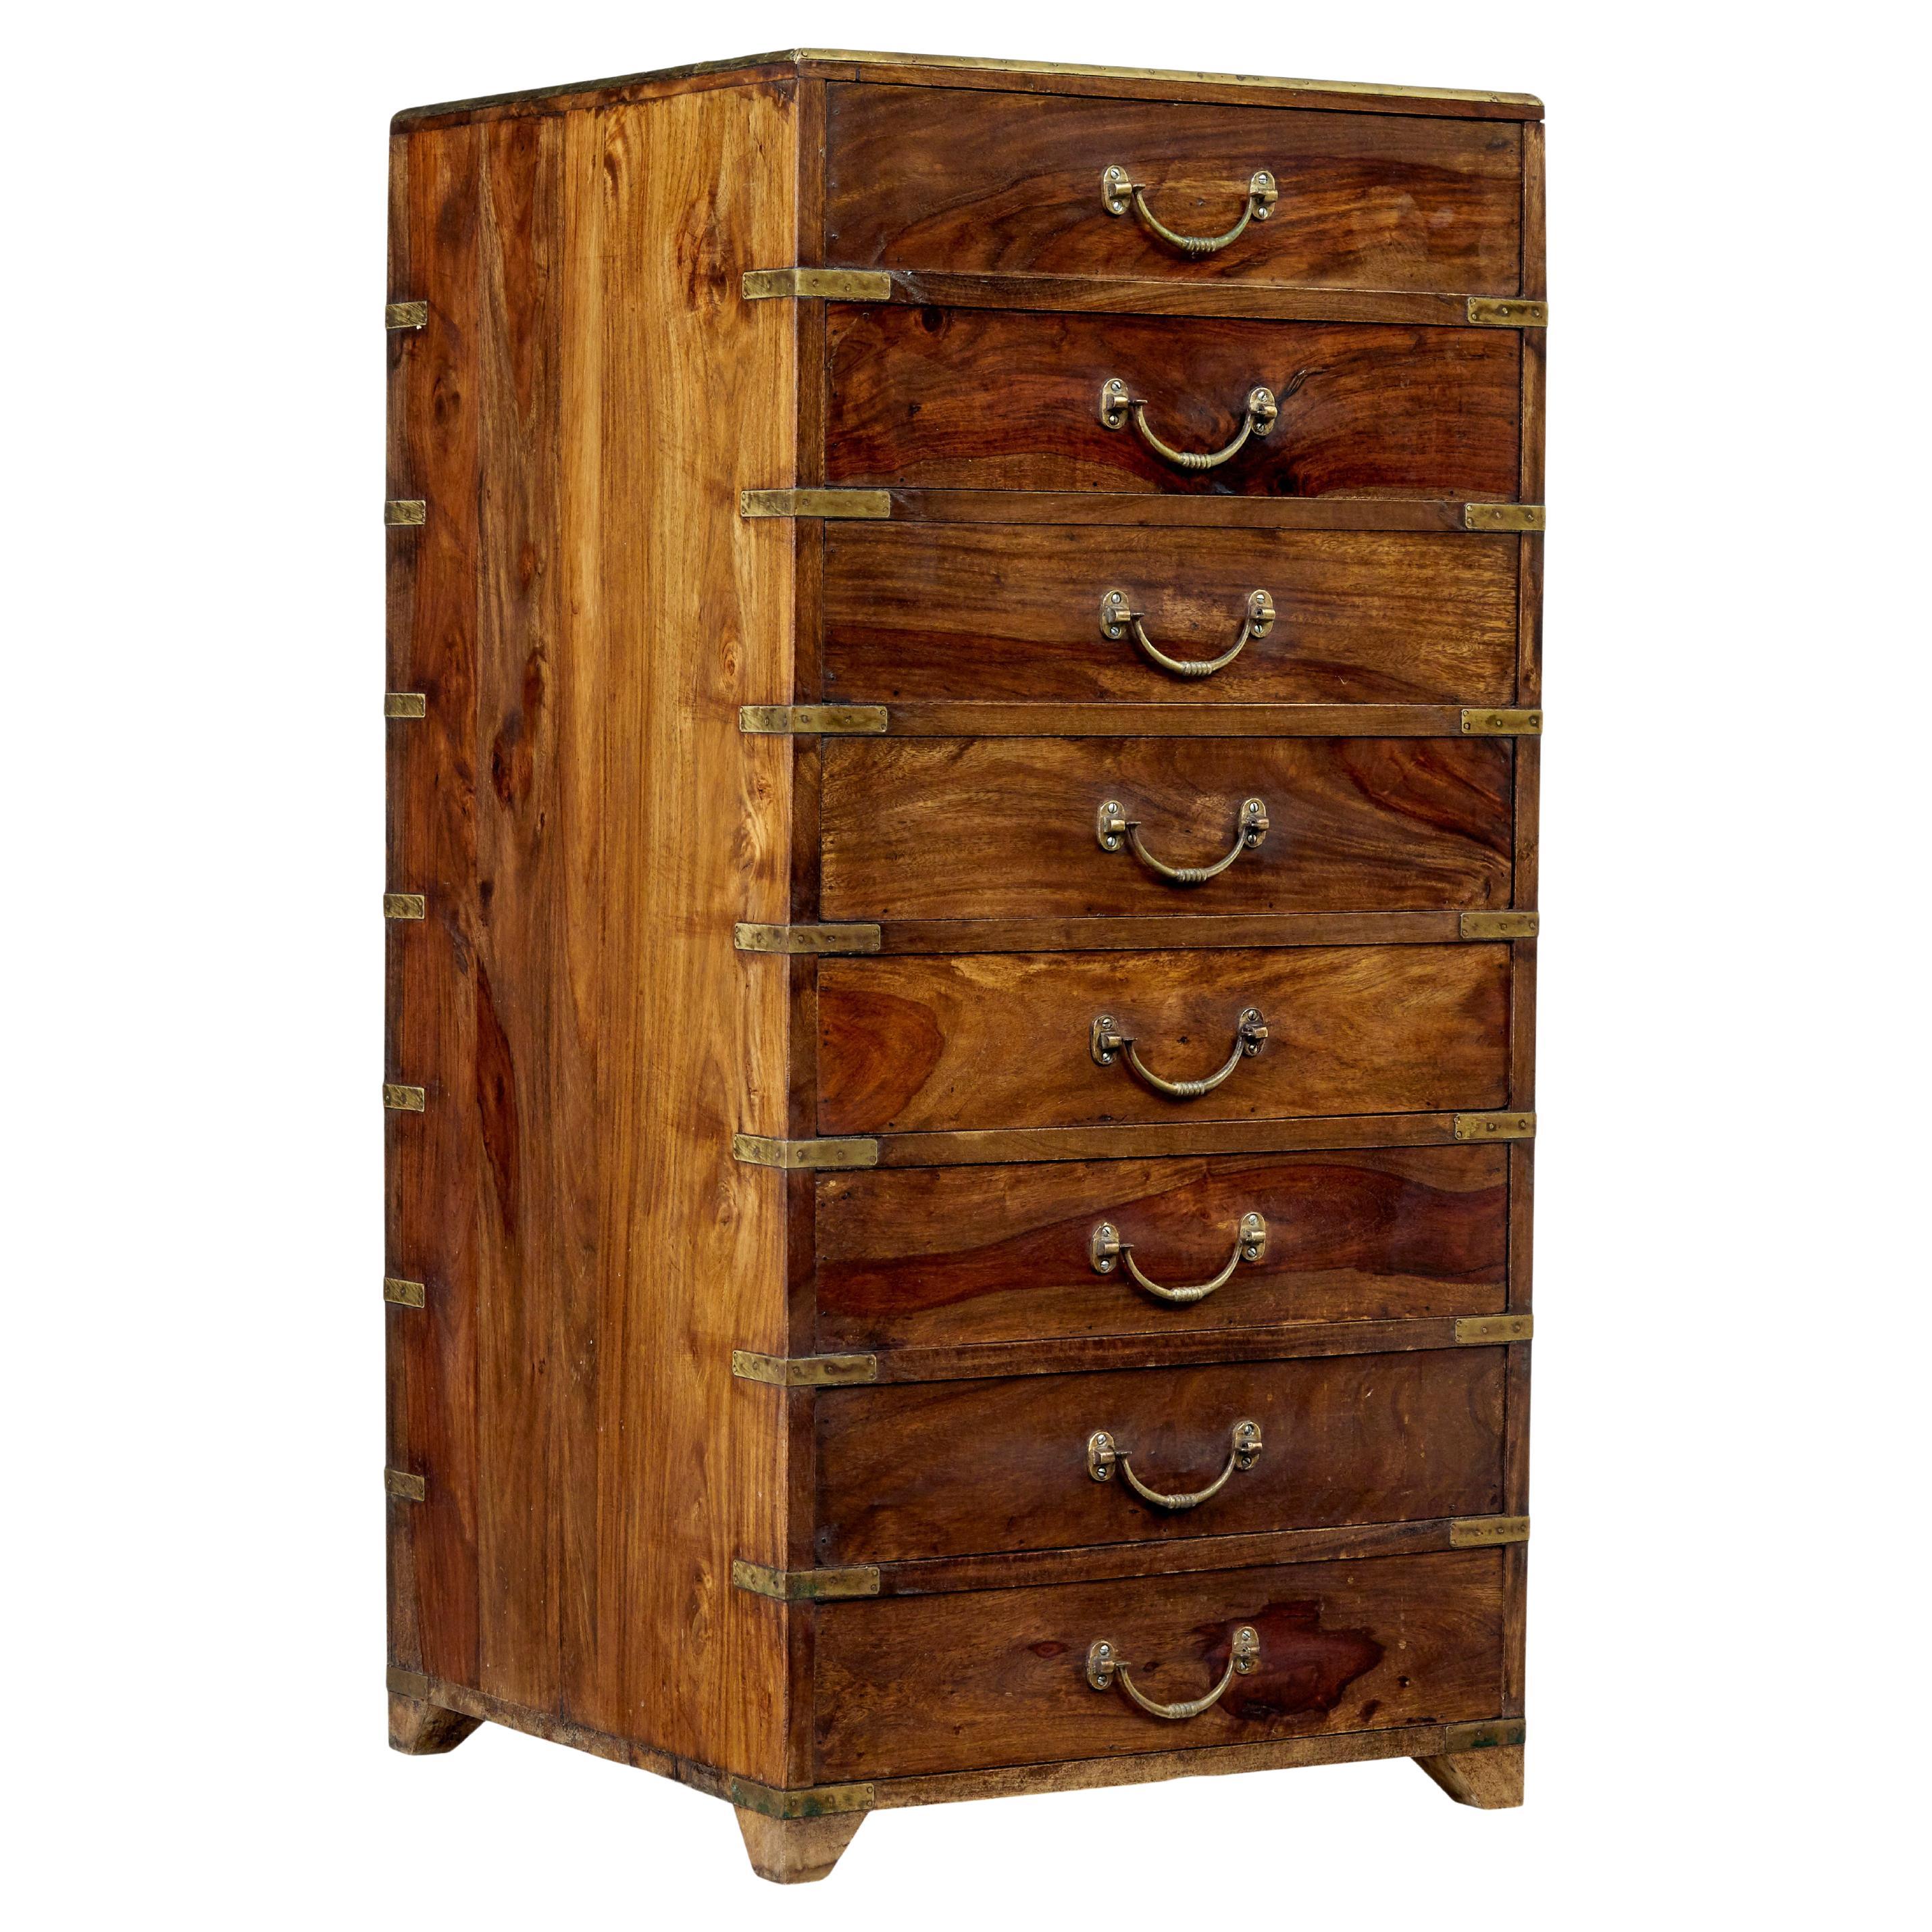 19th Century tall campaign chest of drawers